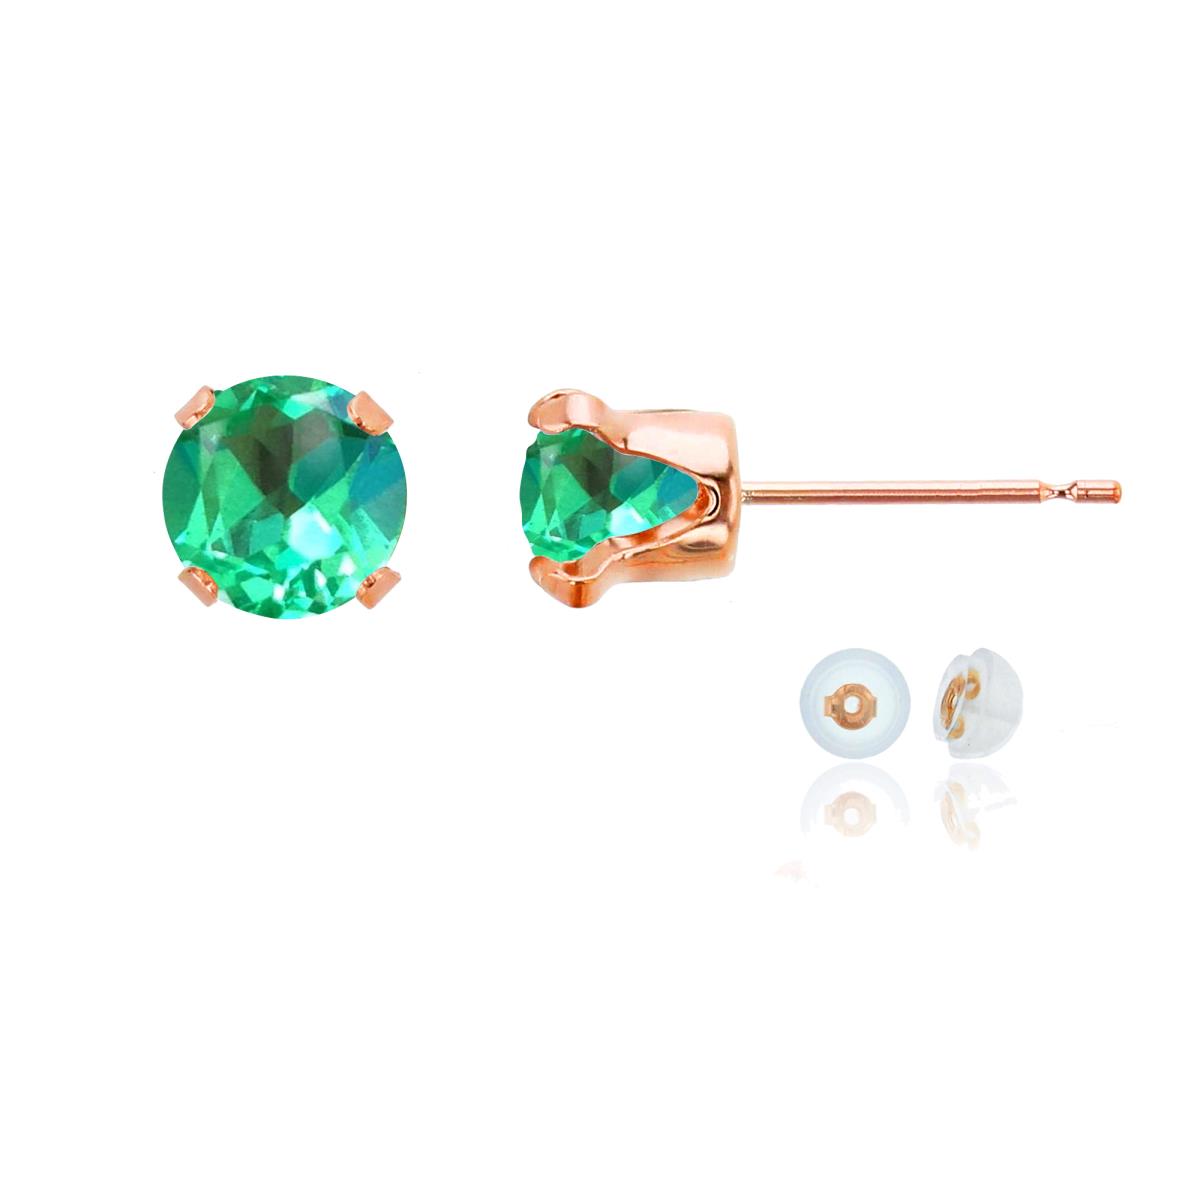 10K Rose Gold 6mm Round Cr Green Sapphire Stud Earring with Silicone Back